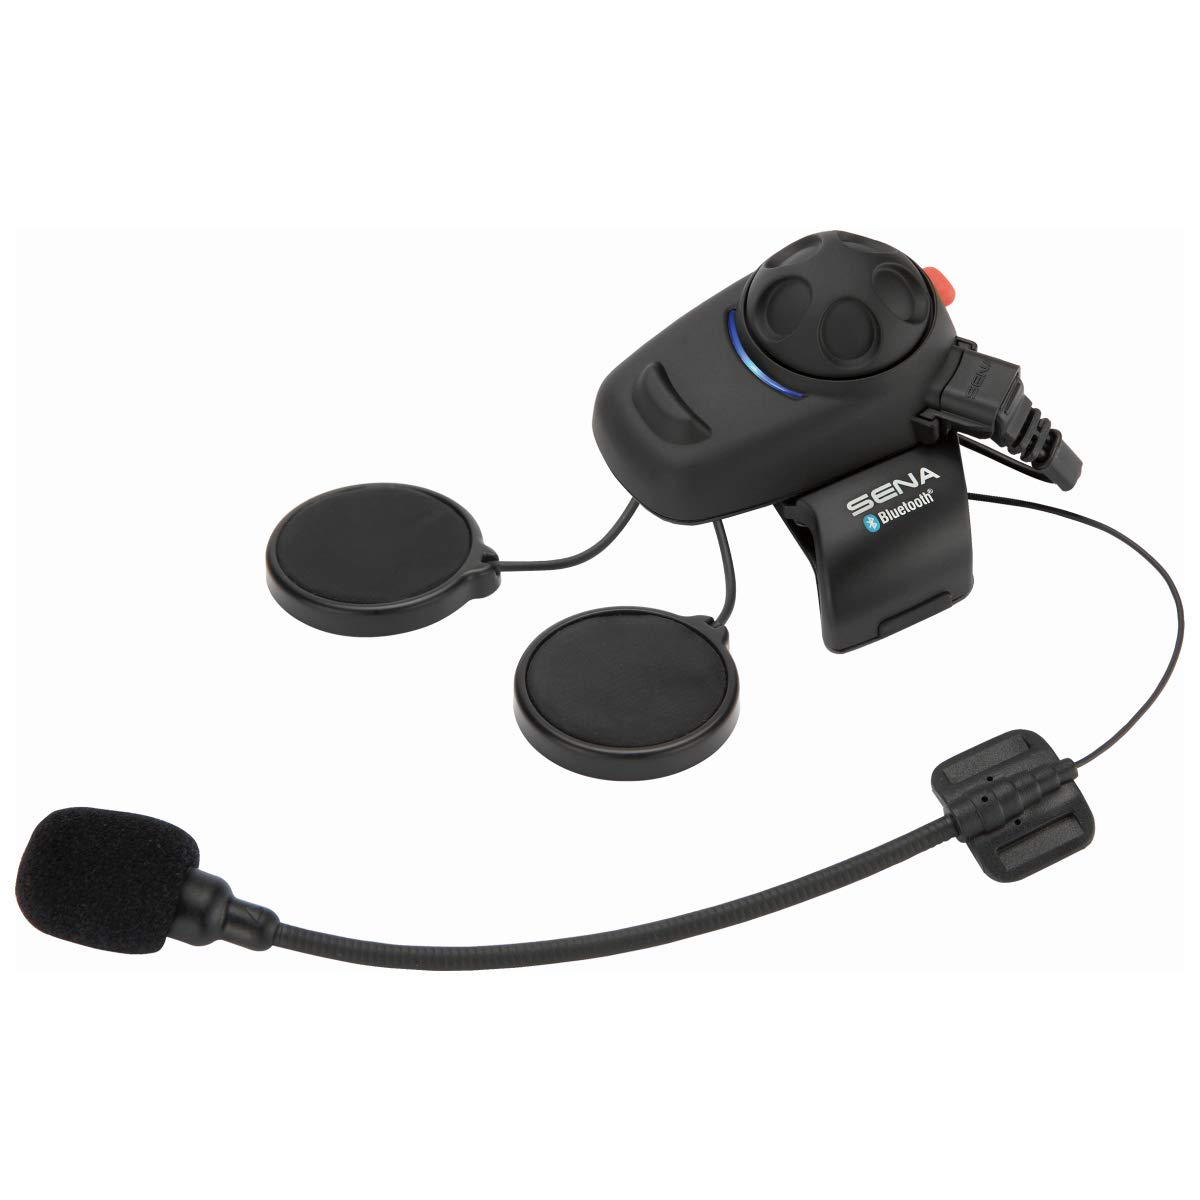 Sena (SMH5-UNIV) Bluetooth Headset and Intercom for Scooters/Motorcycles with Universal Microphone Kit